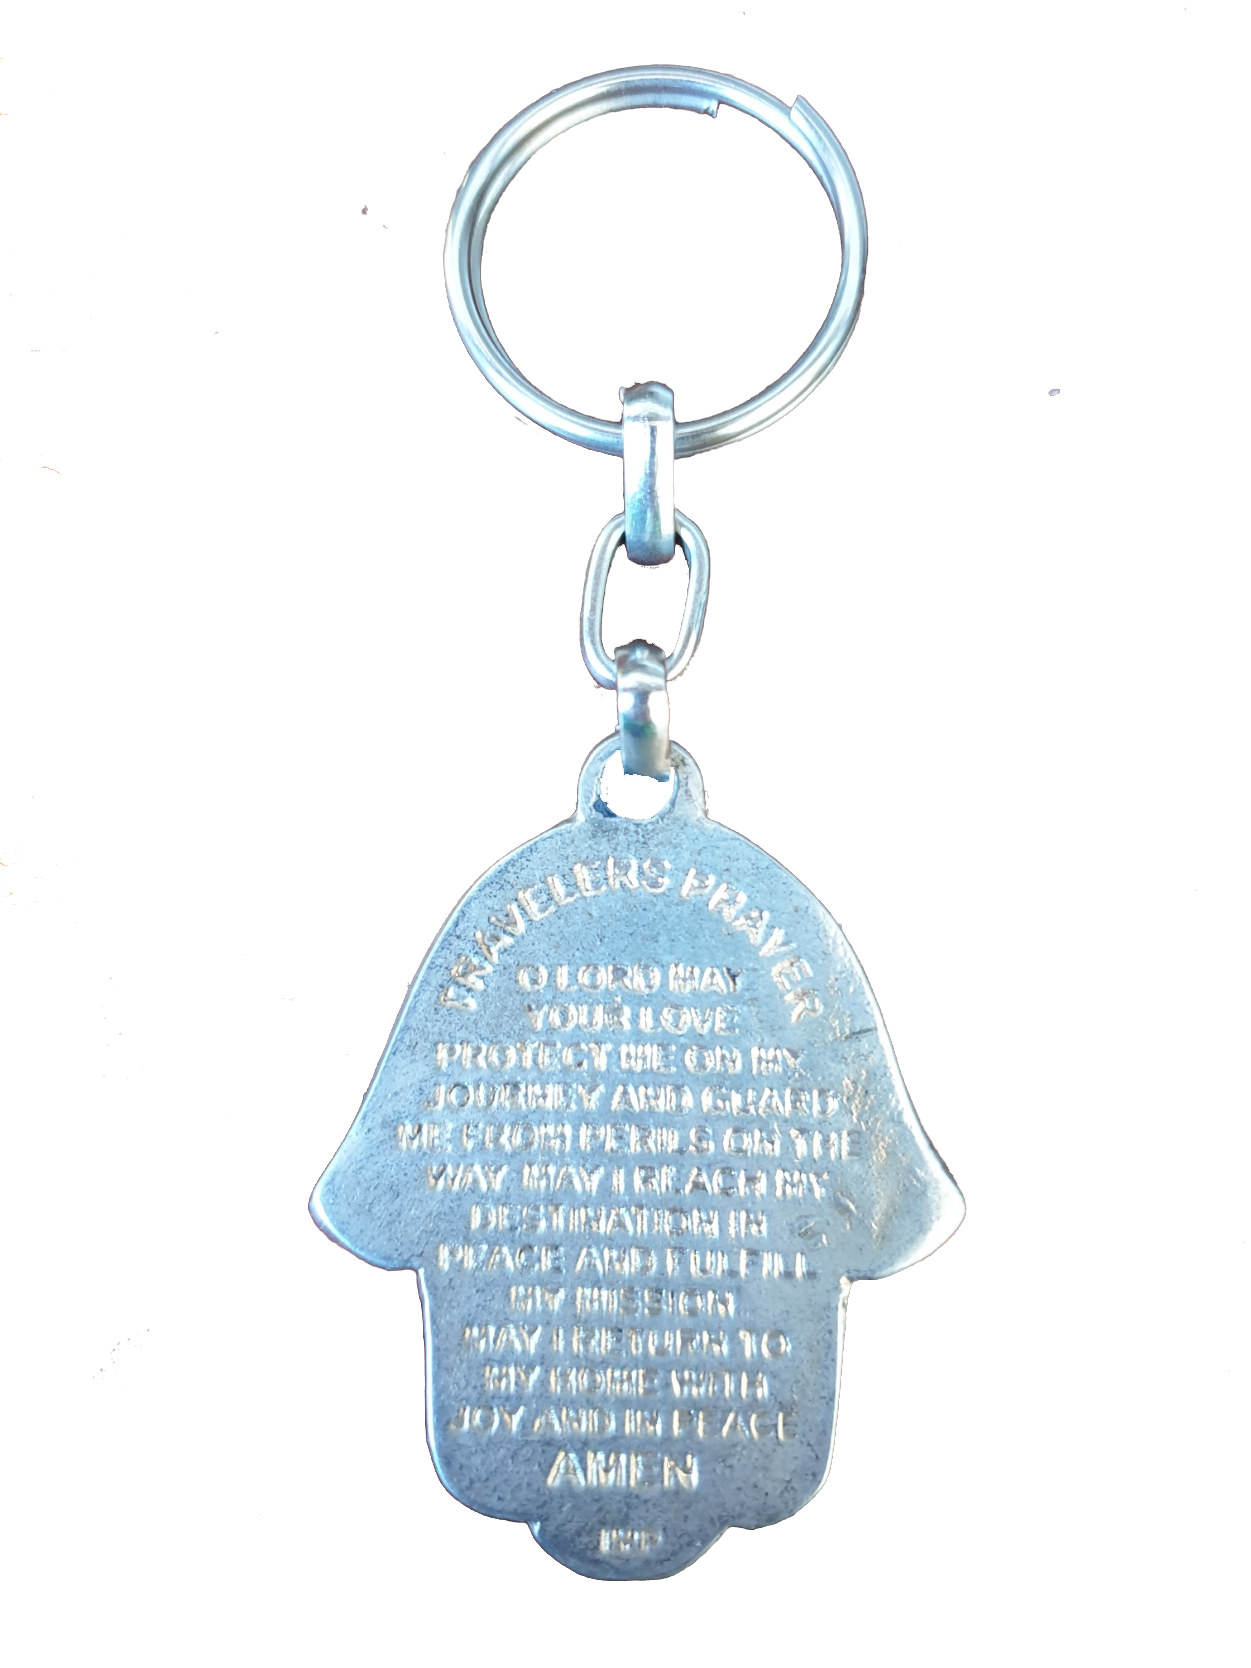 The same keyring but from the back. It is inscribed with a travel prayer which is written out in the next paragraph.